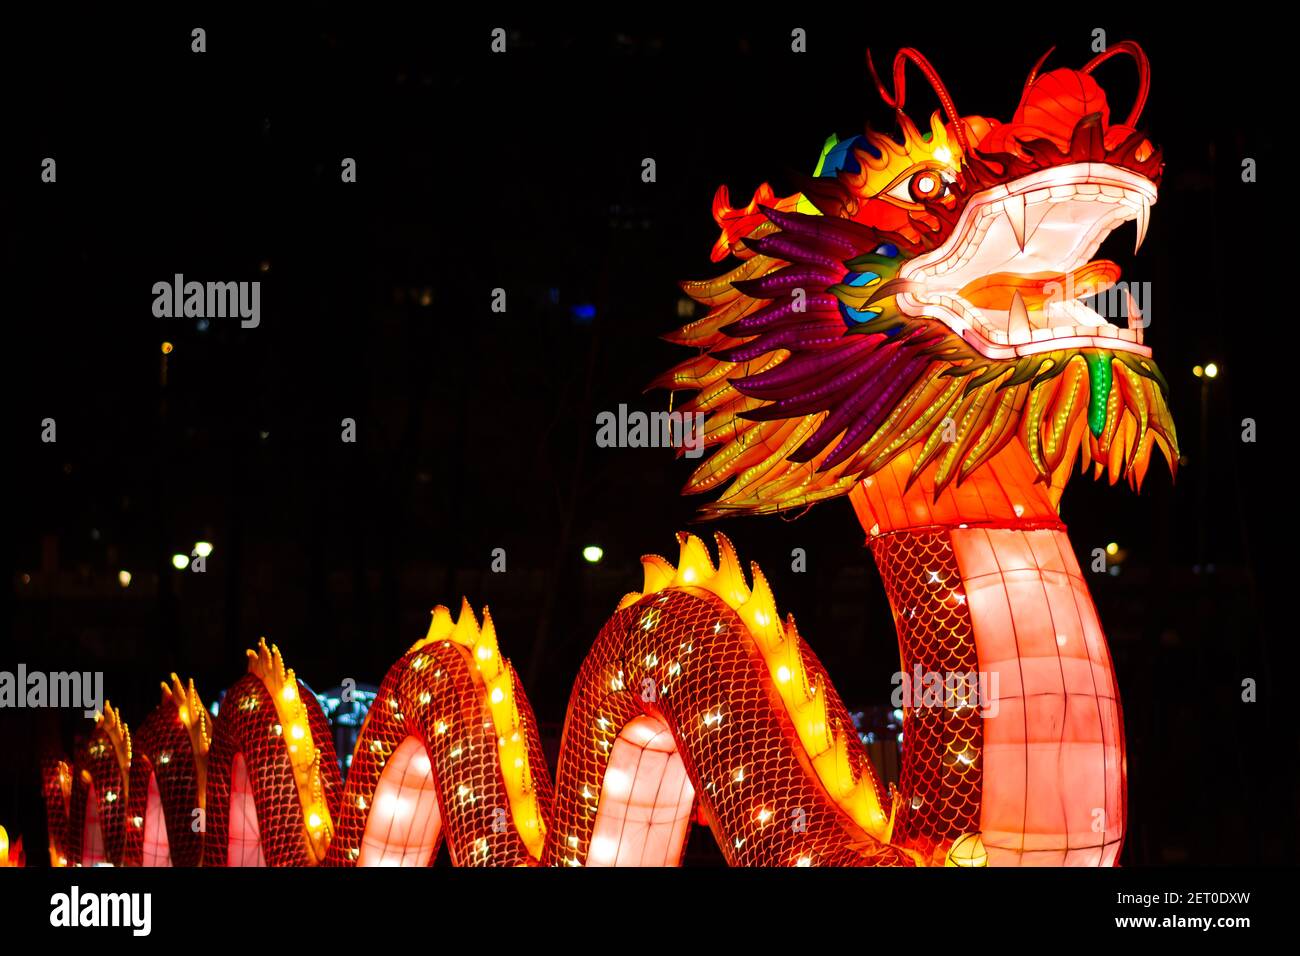 The Chinese Lantern Festival at the Limanski park in Novi Sad. The Chinese dragon with a snake-like body, also known as Loong, Long, Lung. Stock Photo